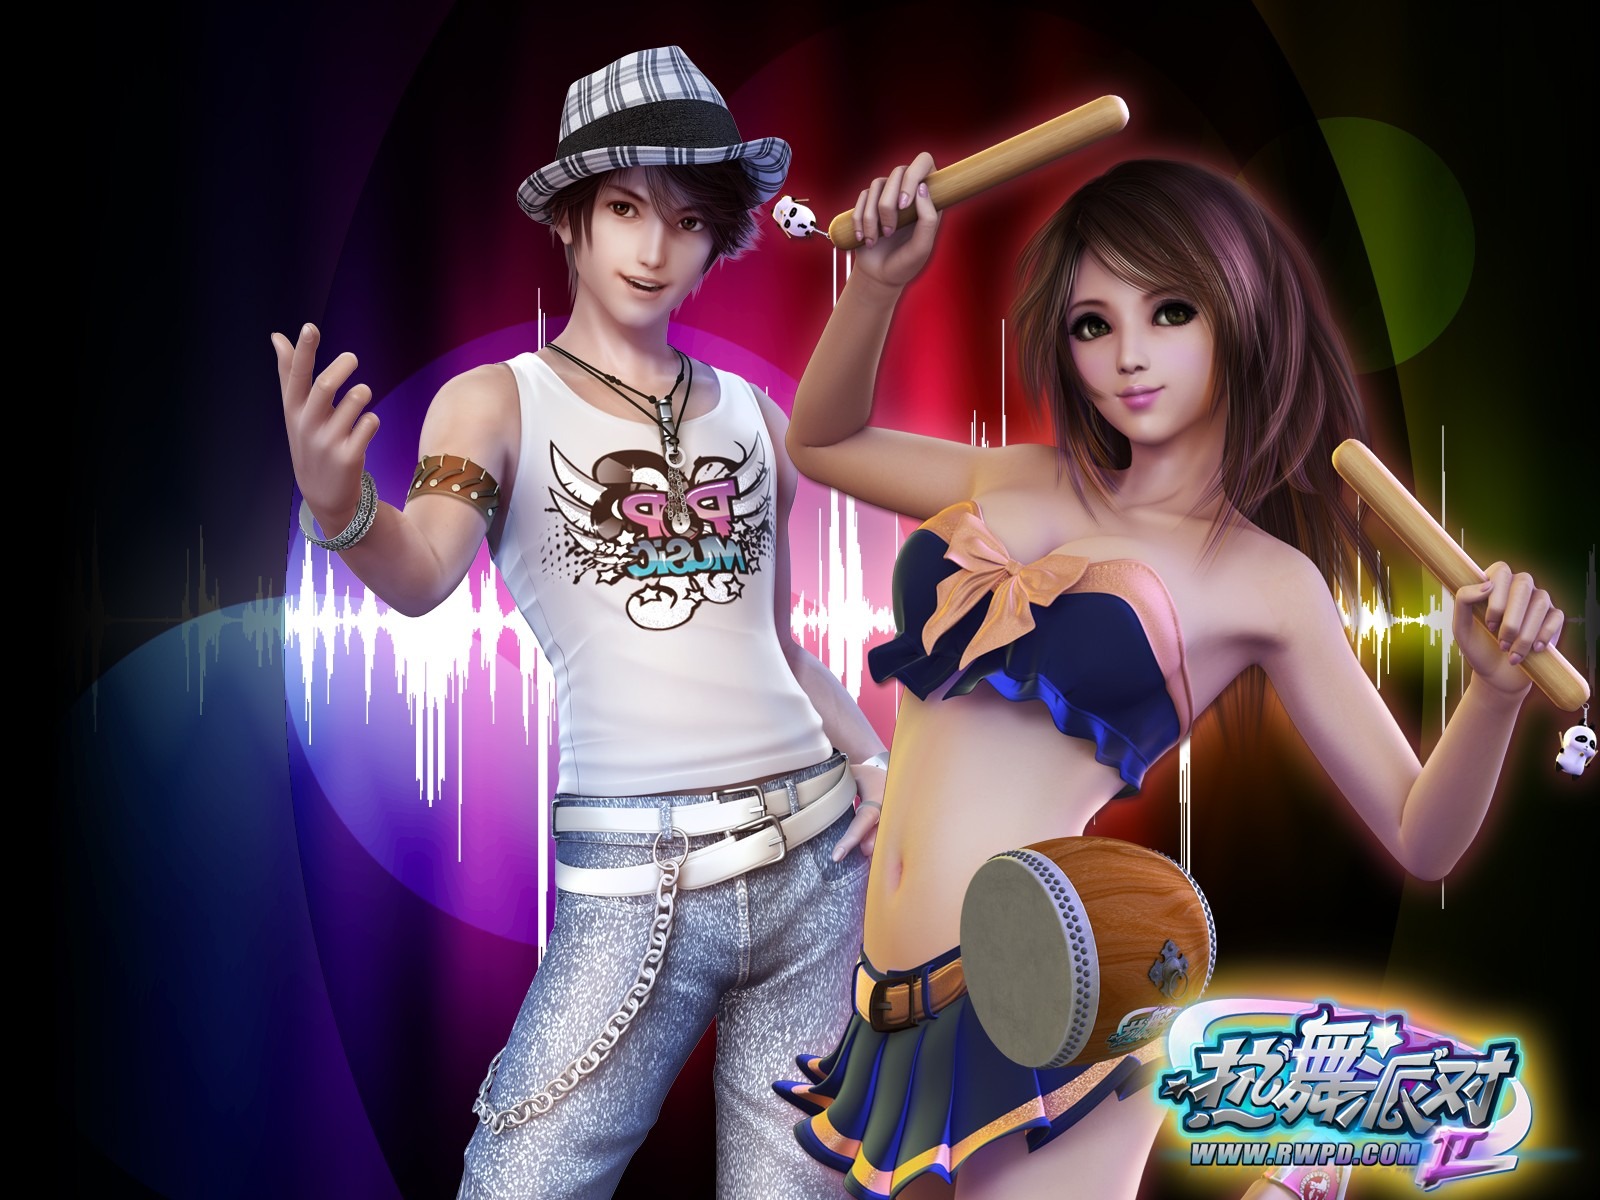 Online game Hot Dance Party II official wallpapers #20 - 1600x1200